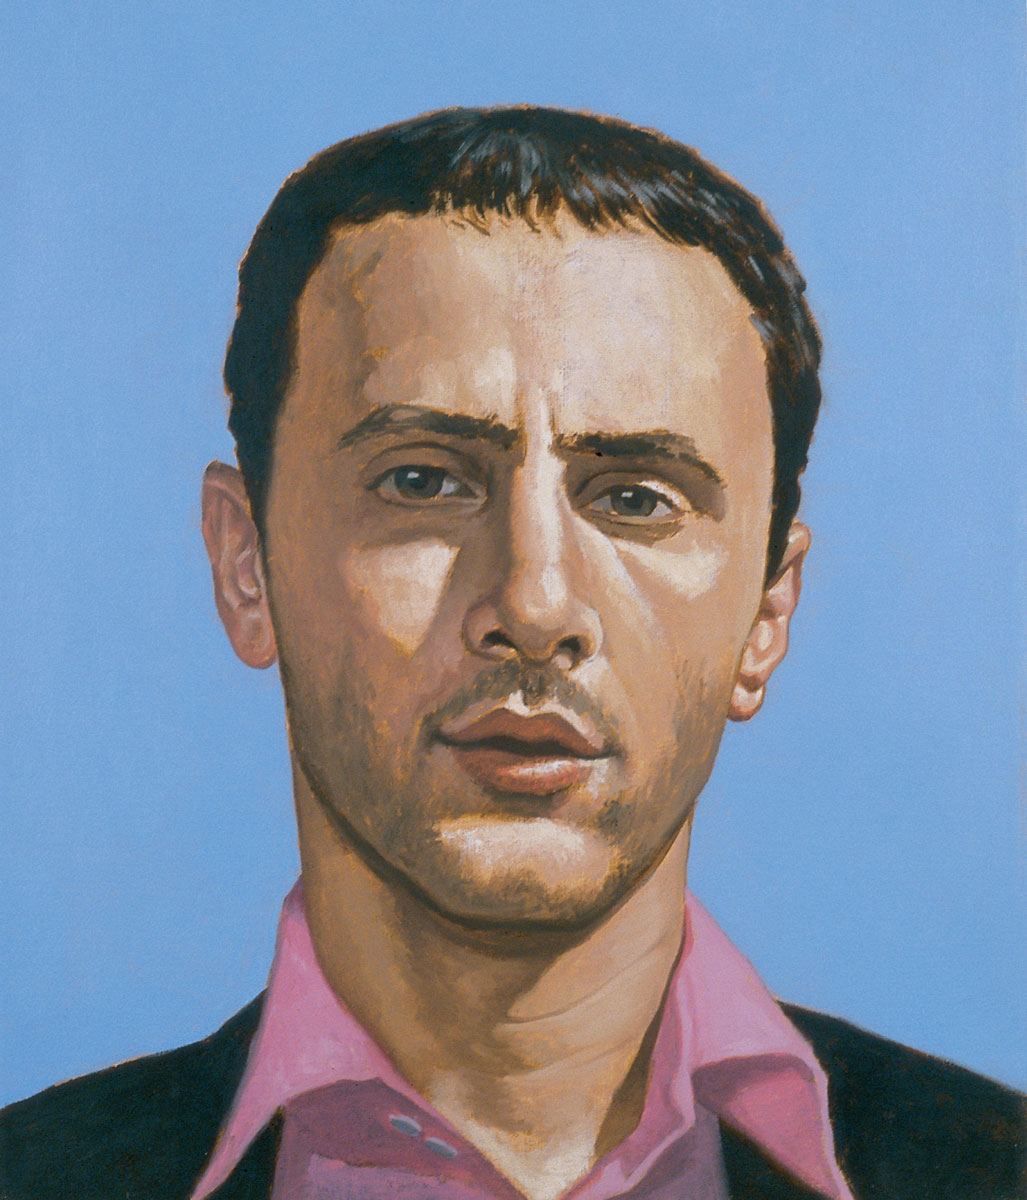 A 2000 painting by Peter Rostovsky depicting a Cabinet reader who described himself as “I’m a 32-yr-old Californian; Anglo/Spaniard mix, short dark straight hair, 5'10